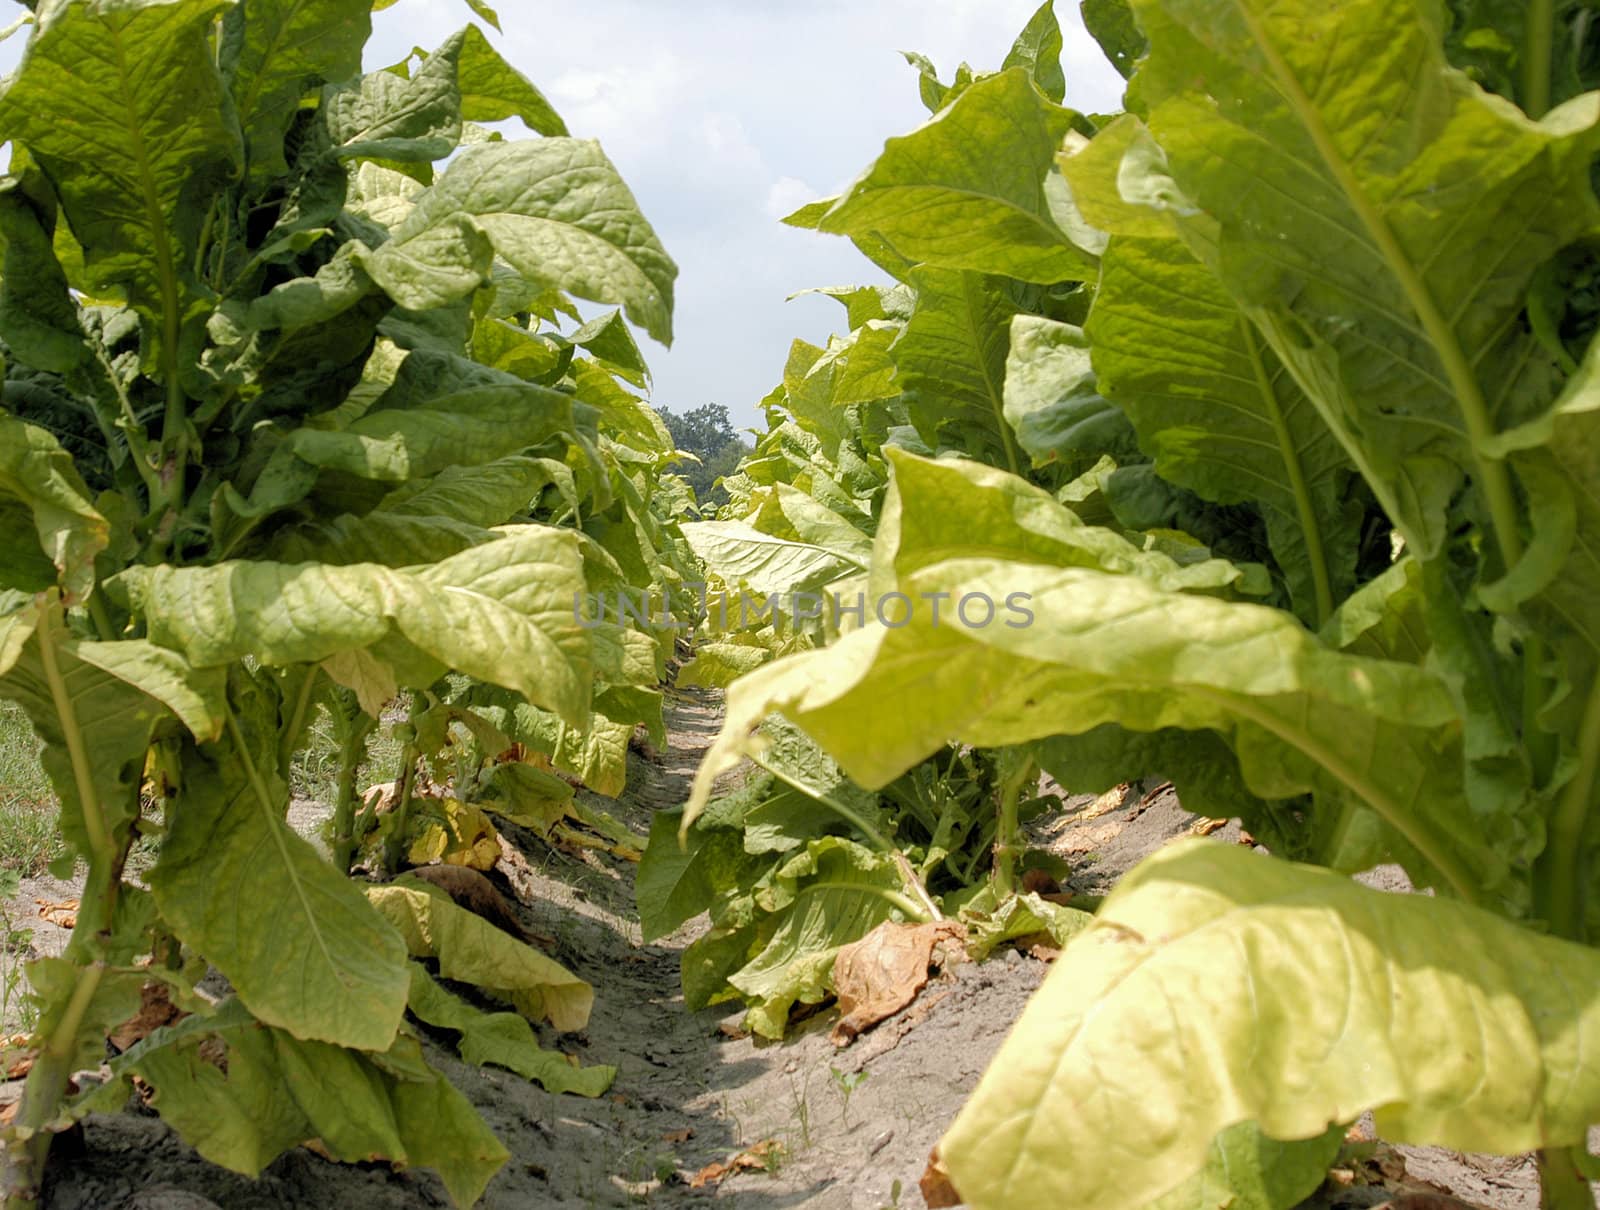 Tobacco plants in the field prior to harvest